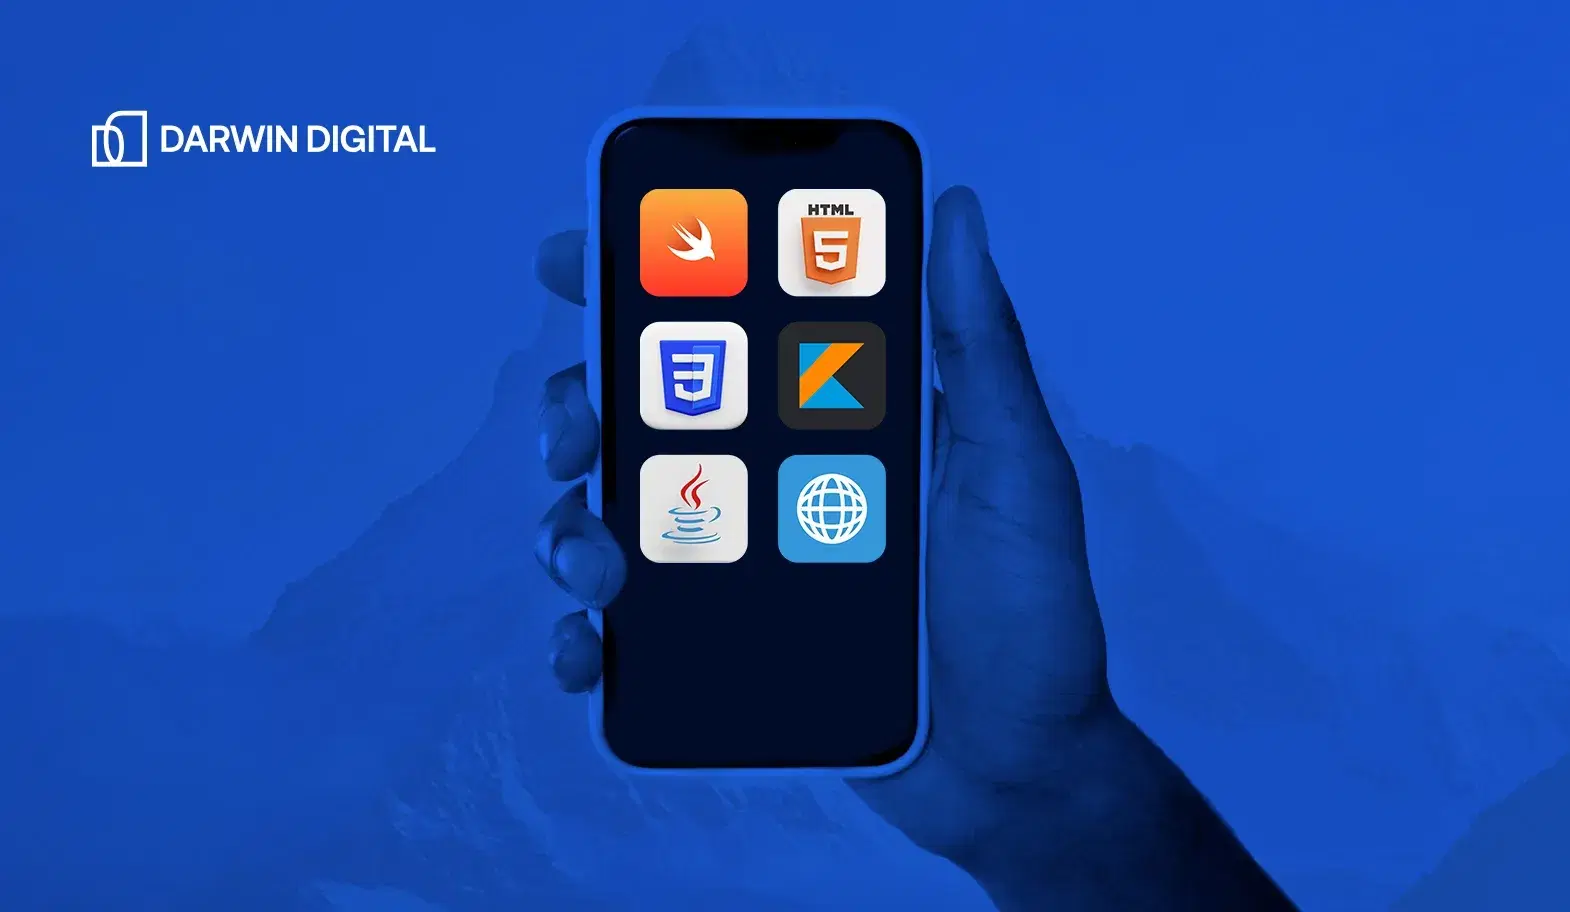 Native, hybrid or web - choosing the best solution for your mobile application